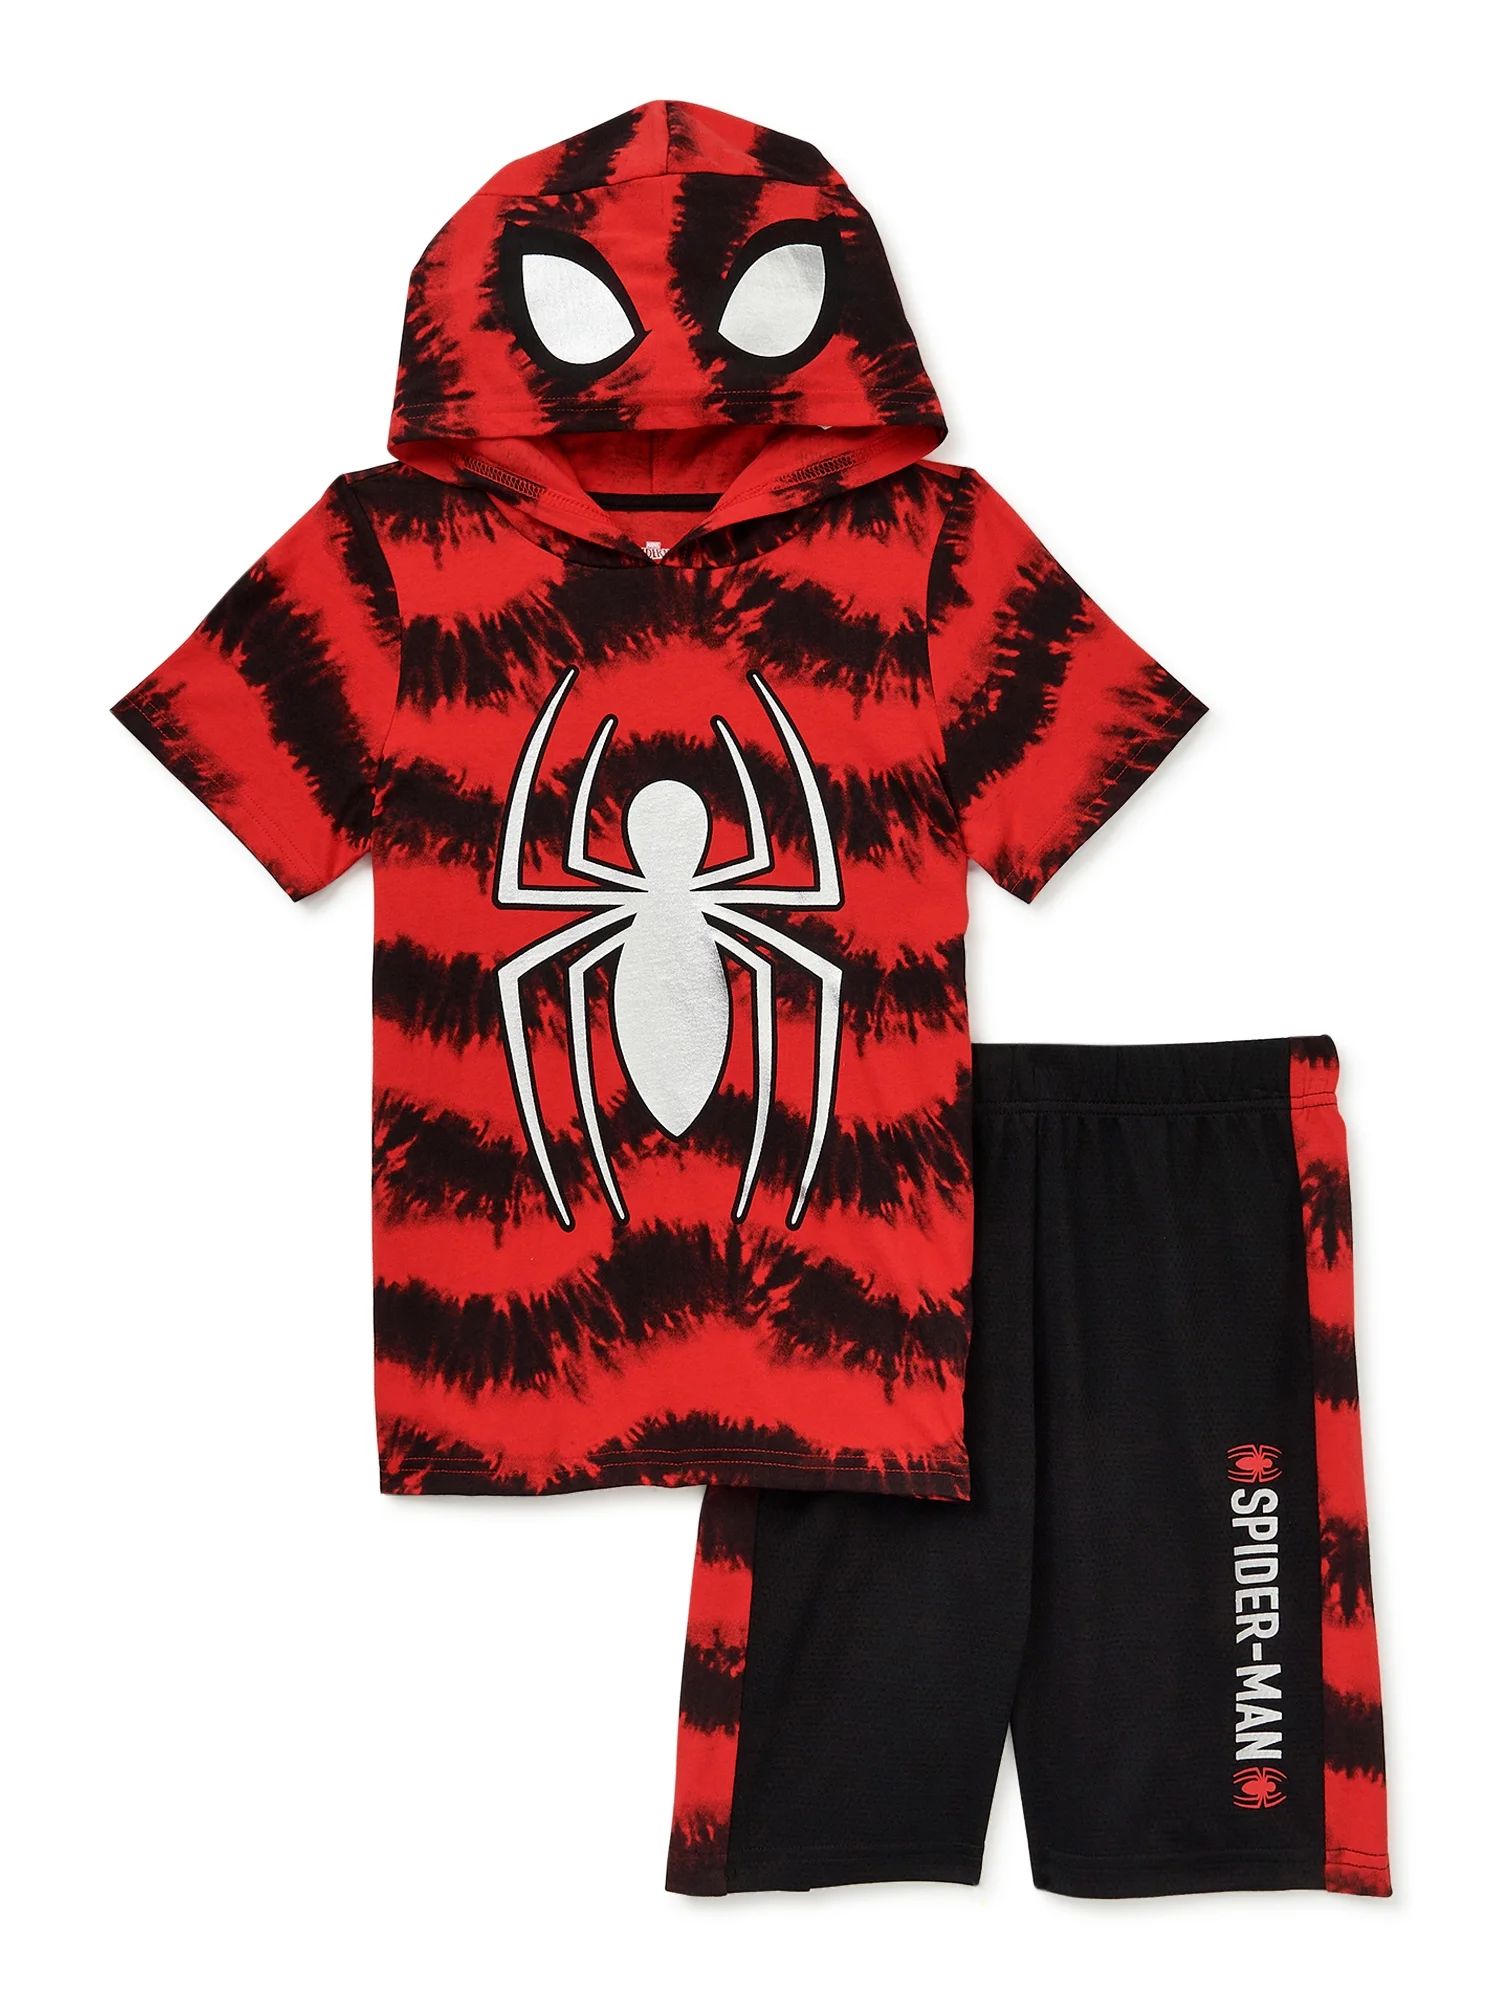 Spiderman Boys Cosplay Hooded Top & Shorts, 2-Piece Outfit Set, Sizes 4-10 | Walmart (US)